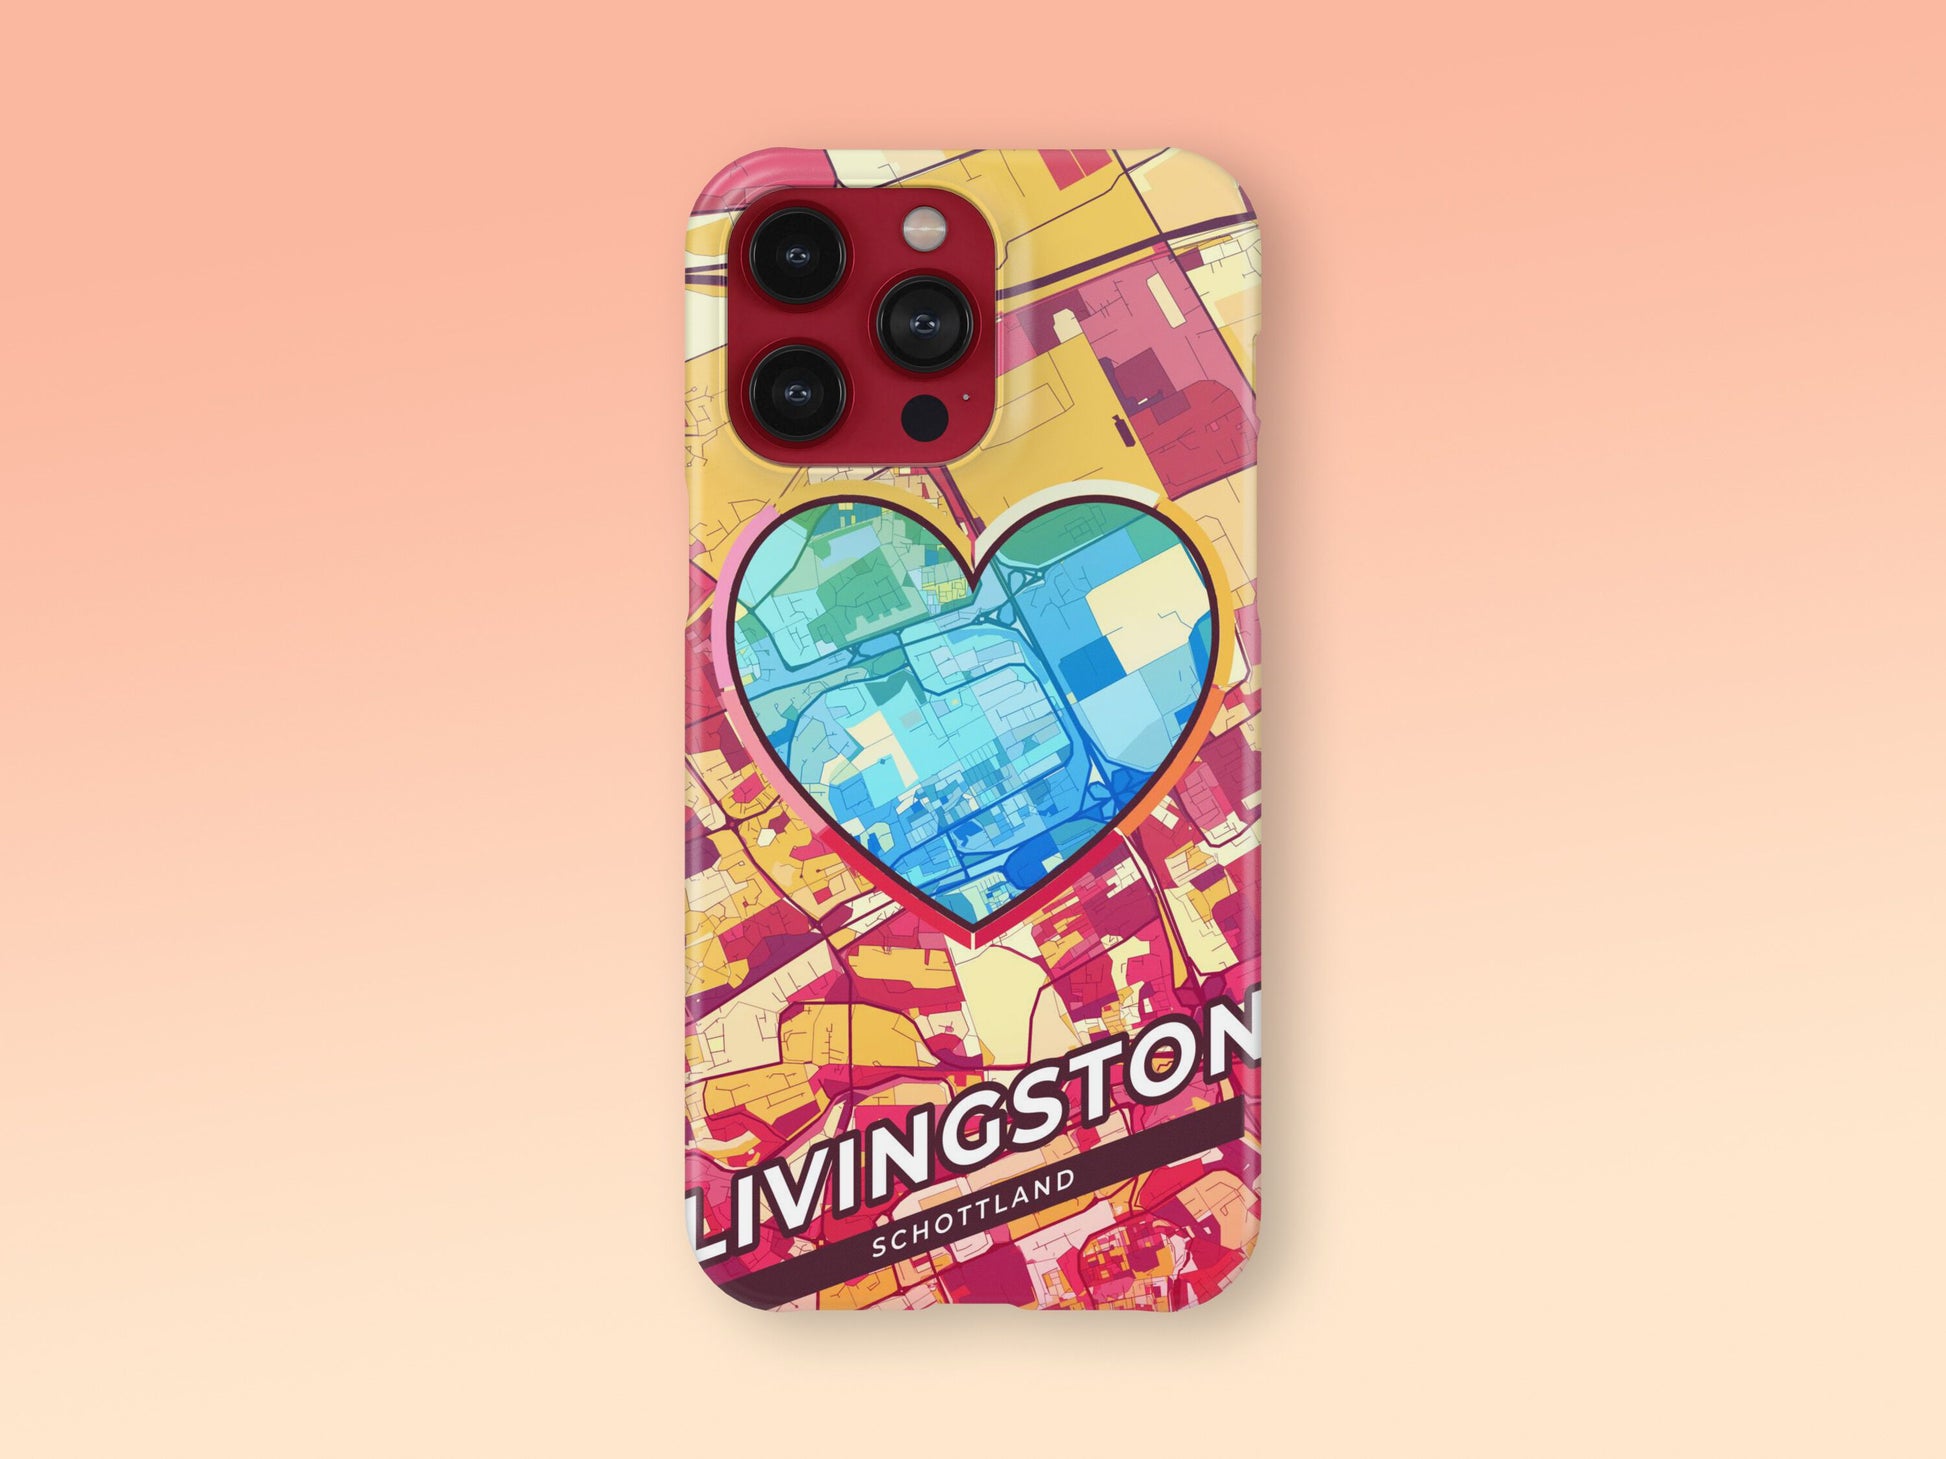 Livingston Scotland slim phone case with colorful icon. Birthday, wedding or housewarming gift. Couple match cases. 2